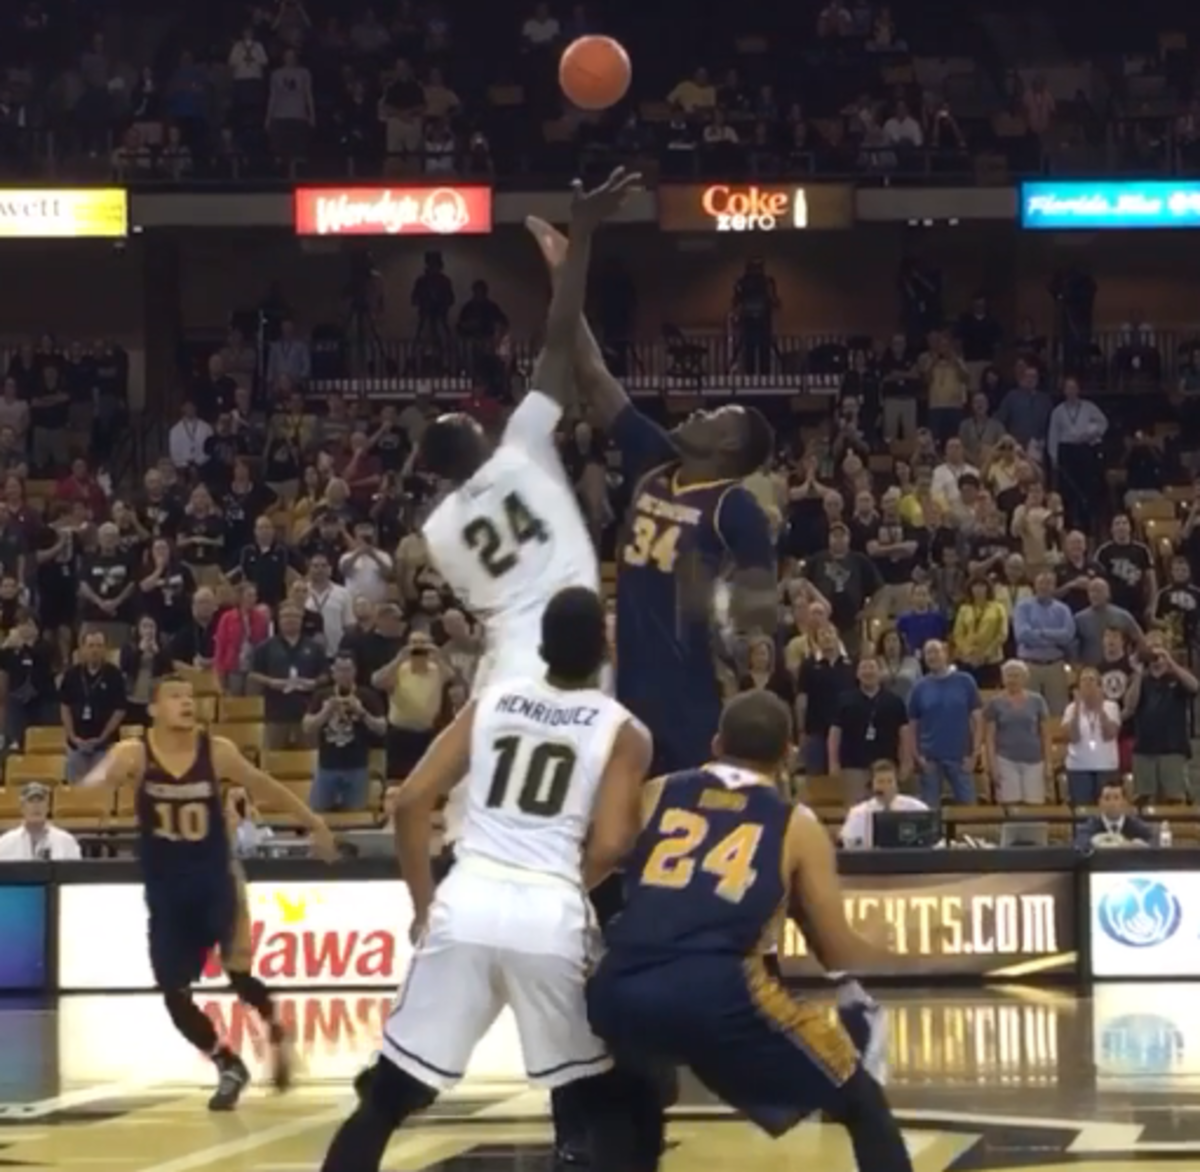 UCF and UC-Irvine's 7 foot 6 centers jump for the opening tip.